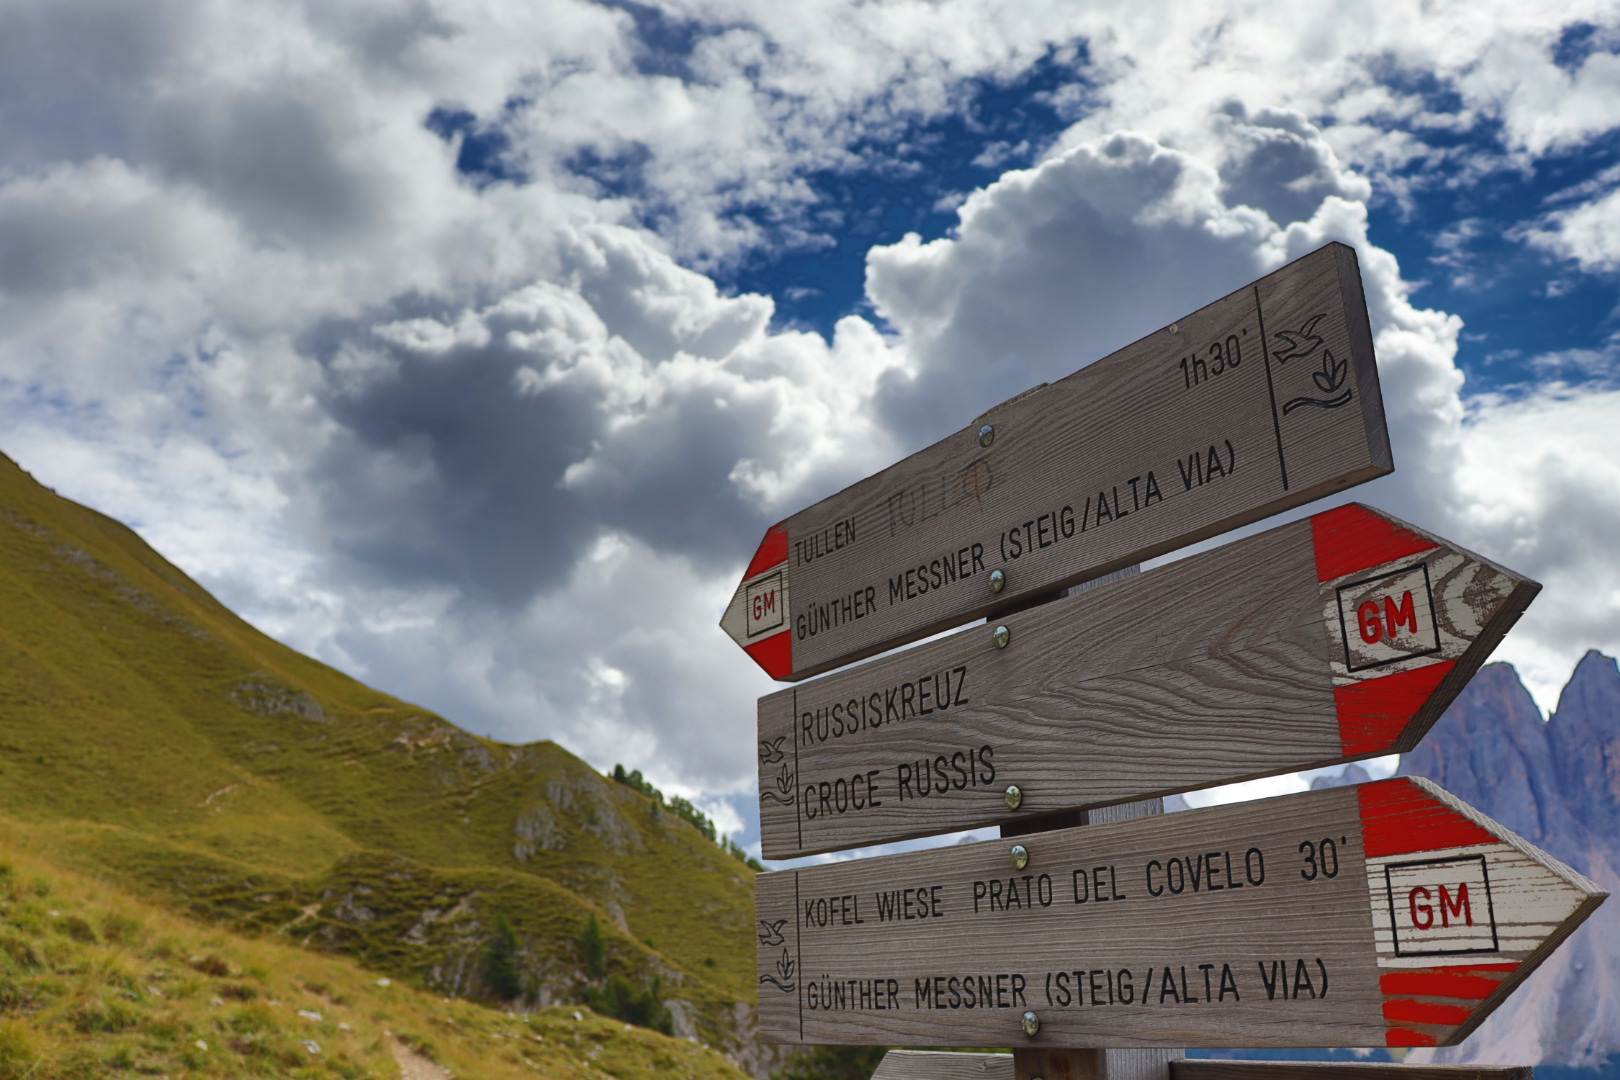 Signpost at the Günther-Messner-Steig at 2190 meters (September 10, 12:03 pm)